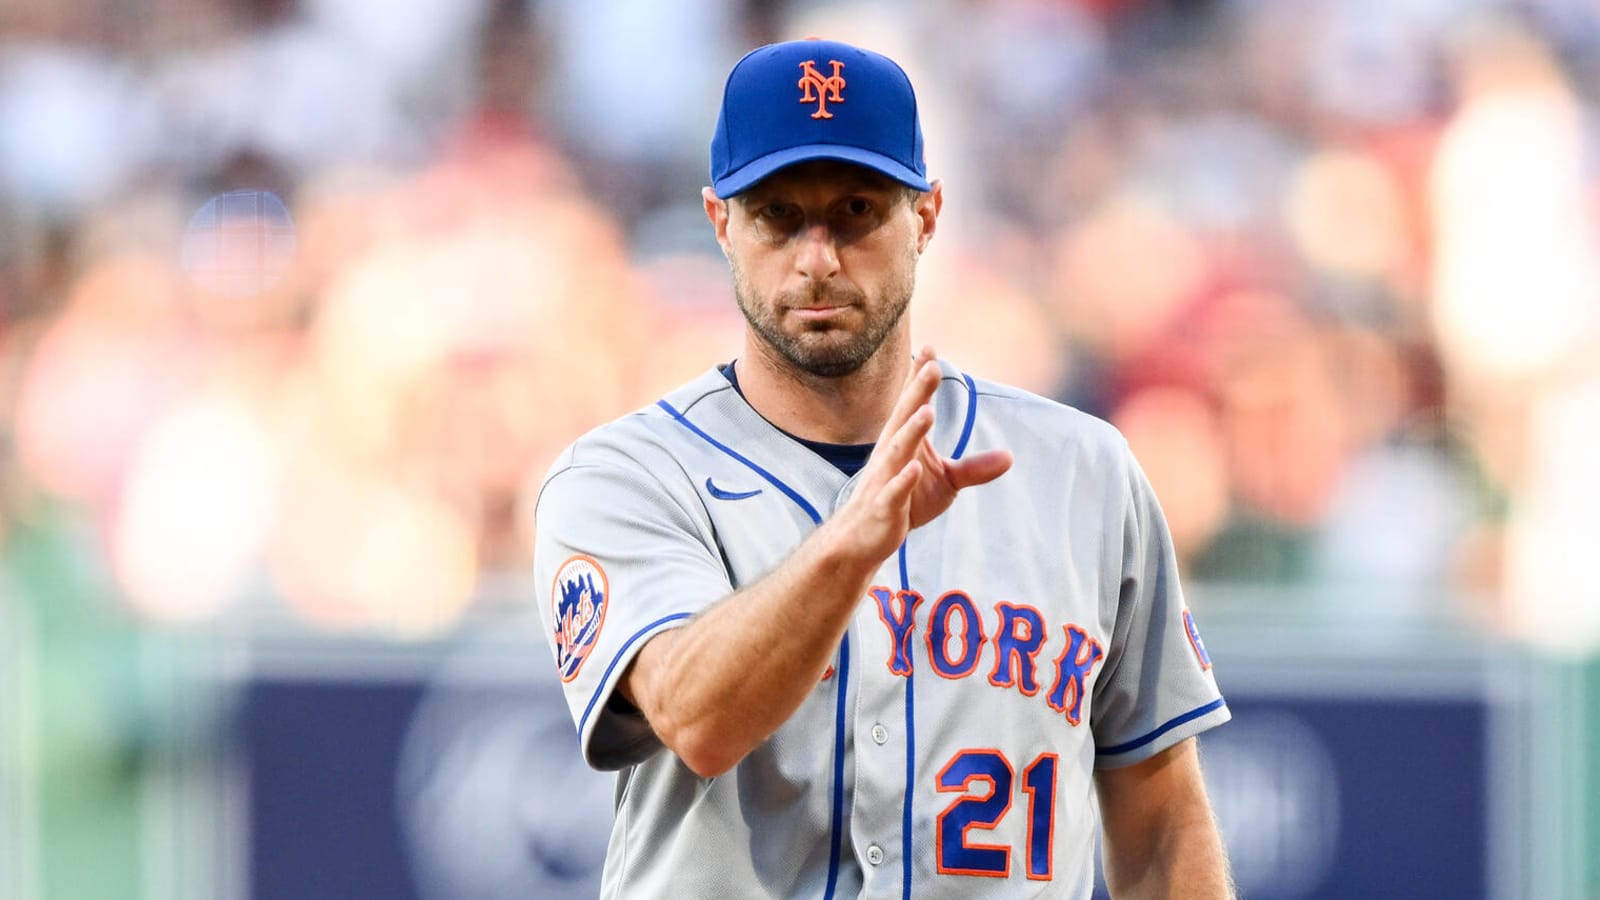 Max Scherzer: What he thinks of joining Jacob deGrom, NY Mets